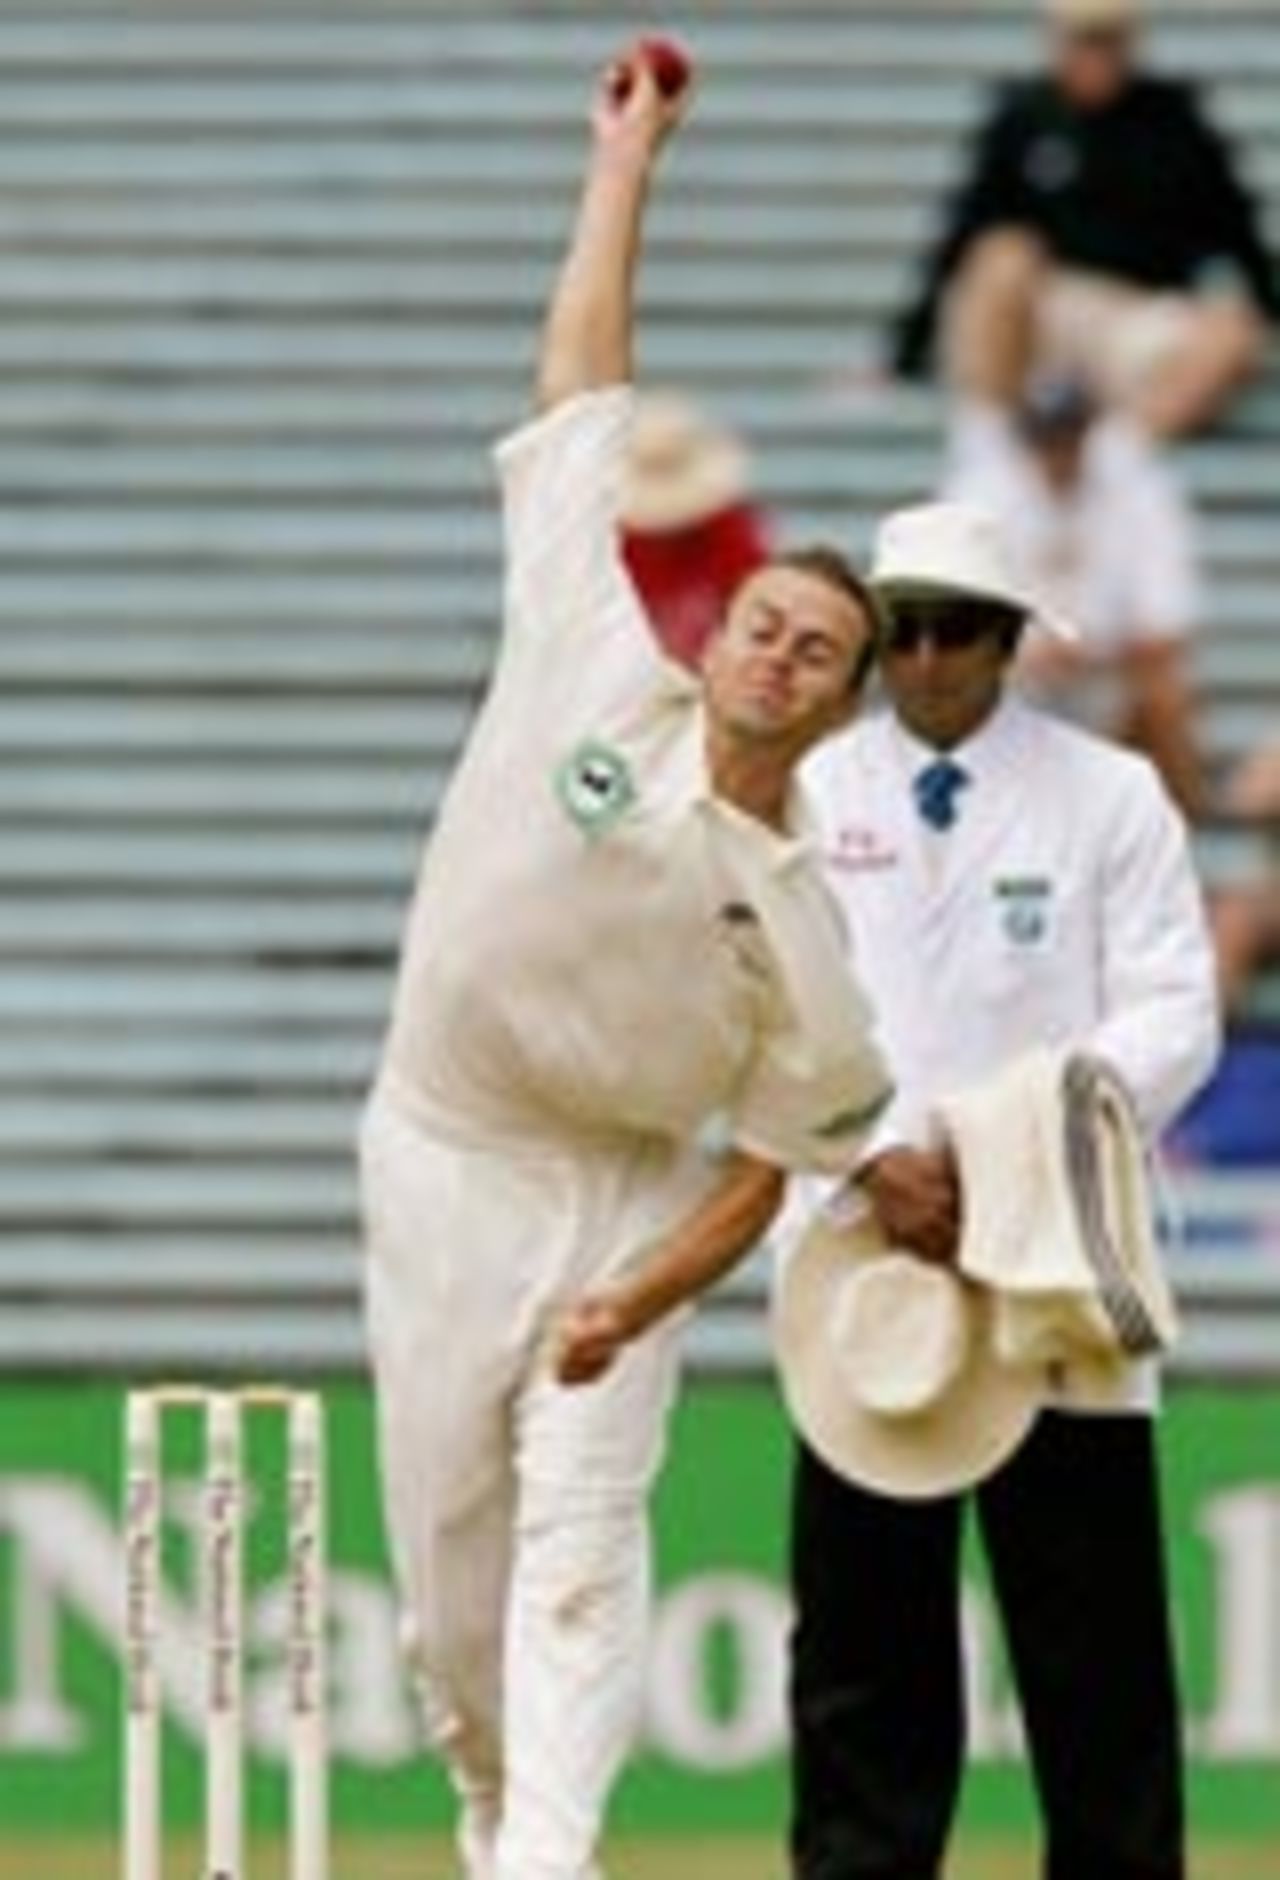 Chris Martin bowling, New Zealand v South Africa, 2nd Test, Auckland, 2nd day, March 19th, 2004